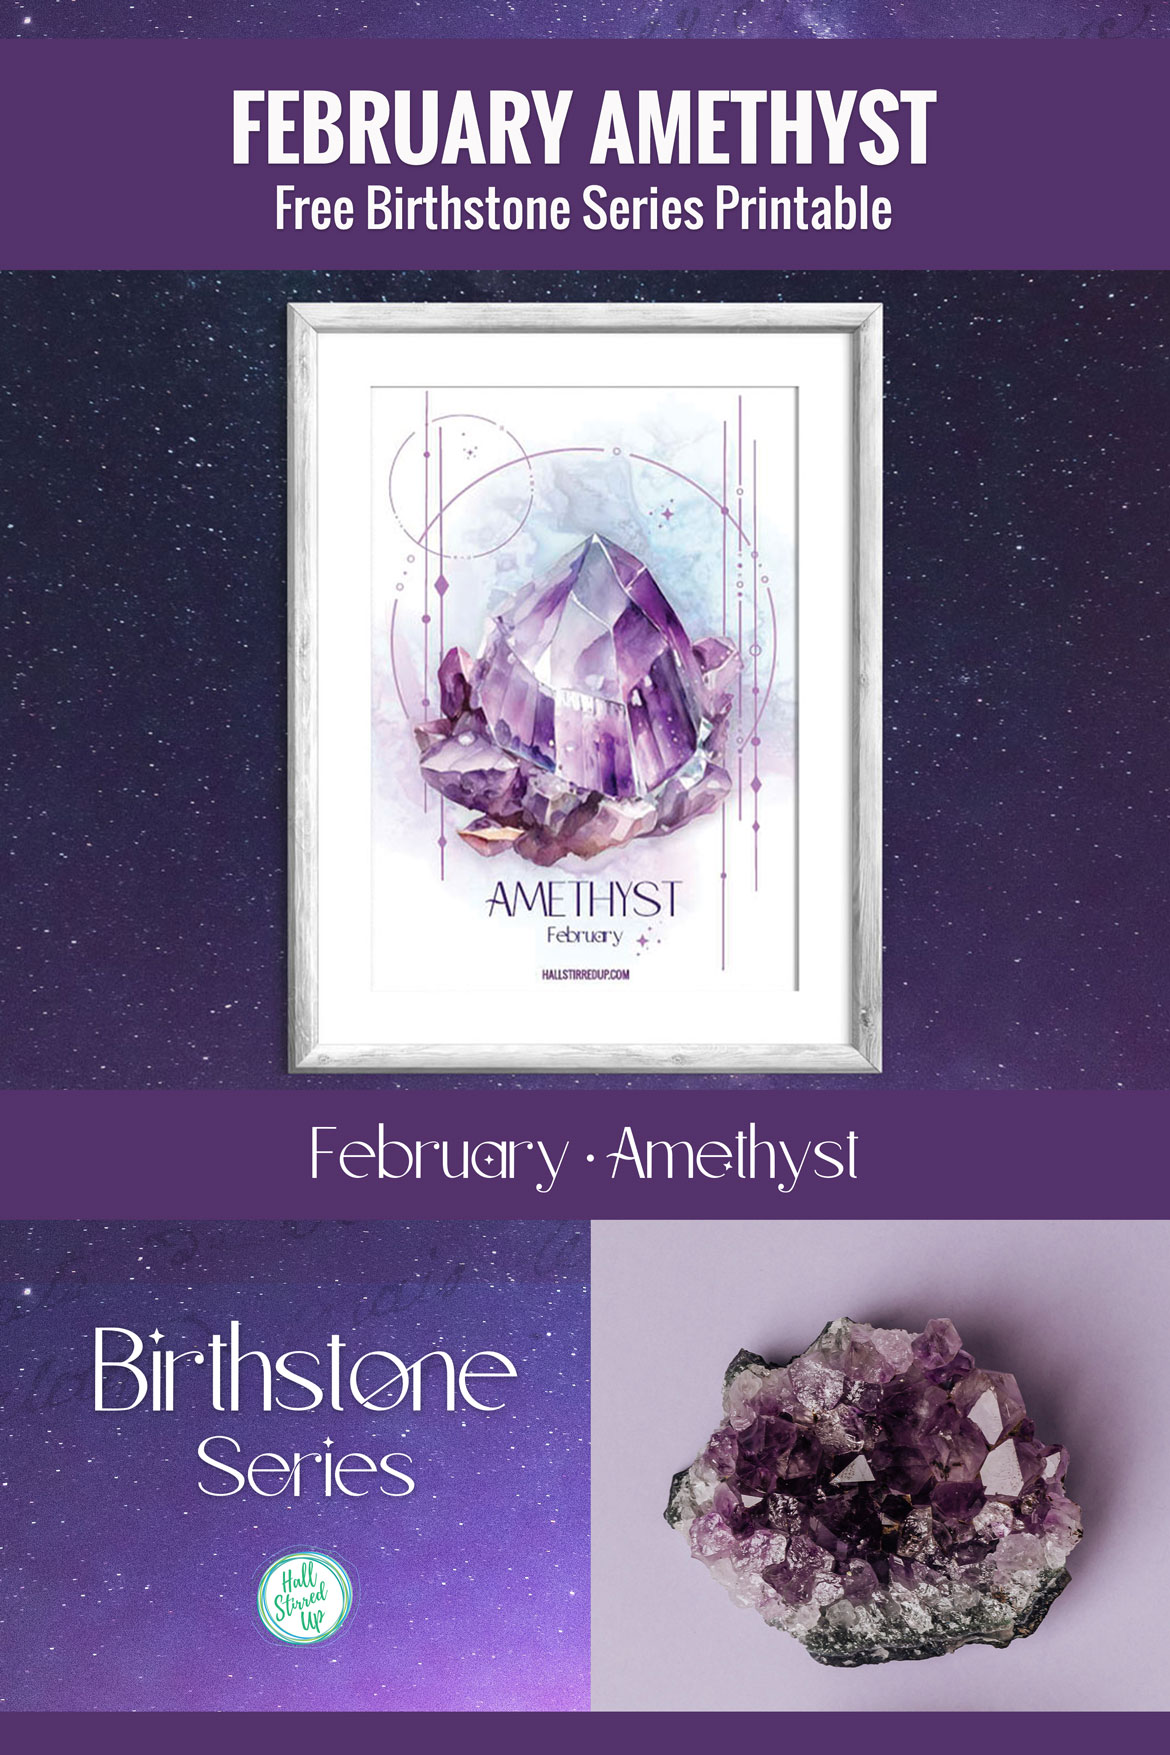 February's birthstone is the beautiful Amethyst - with free printable